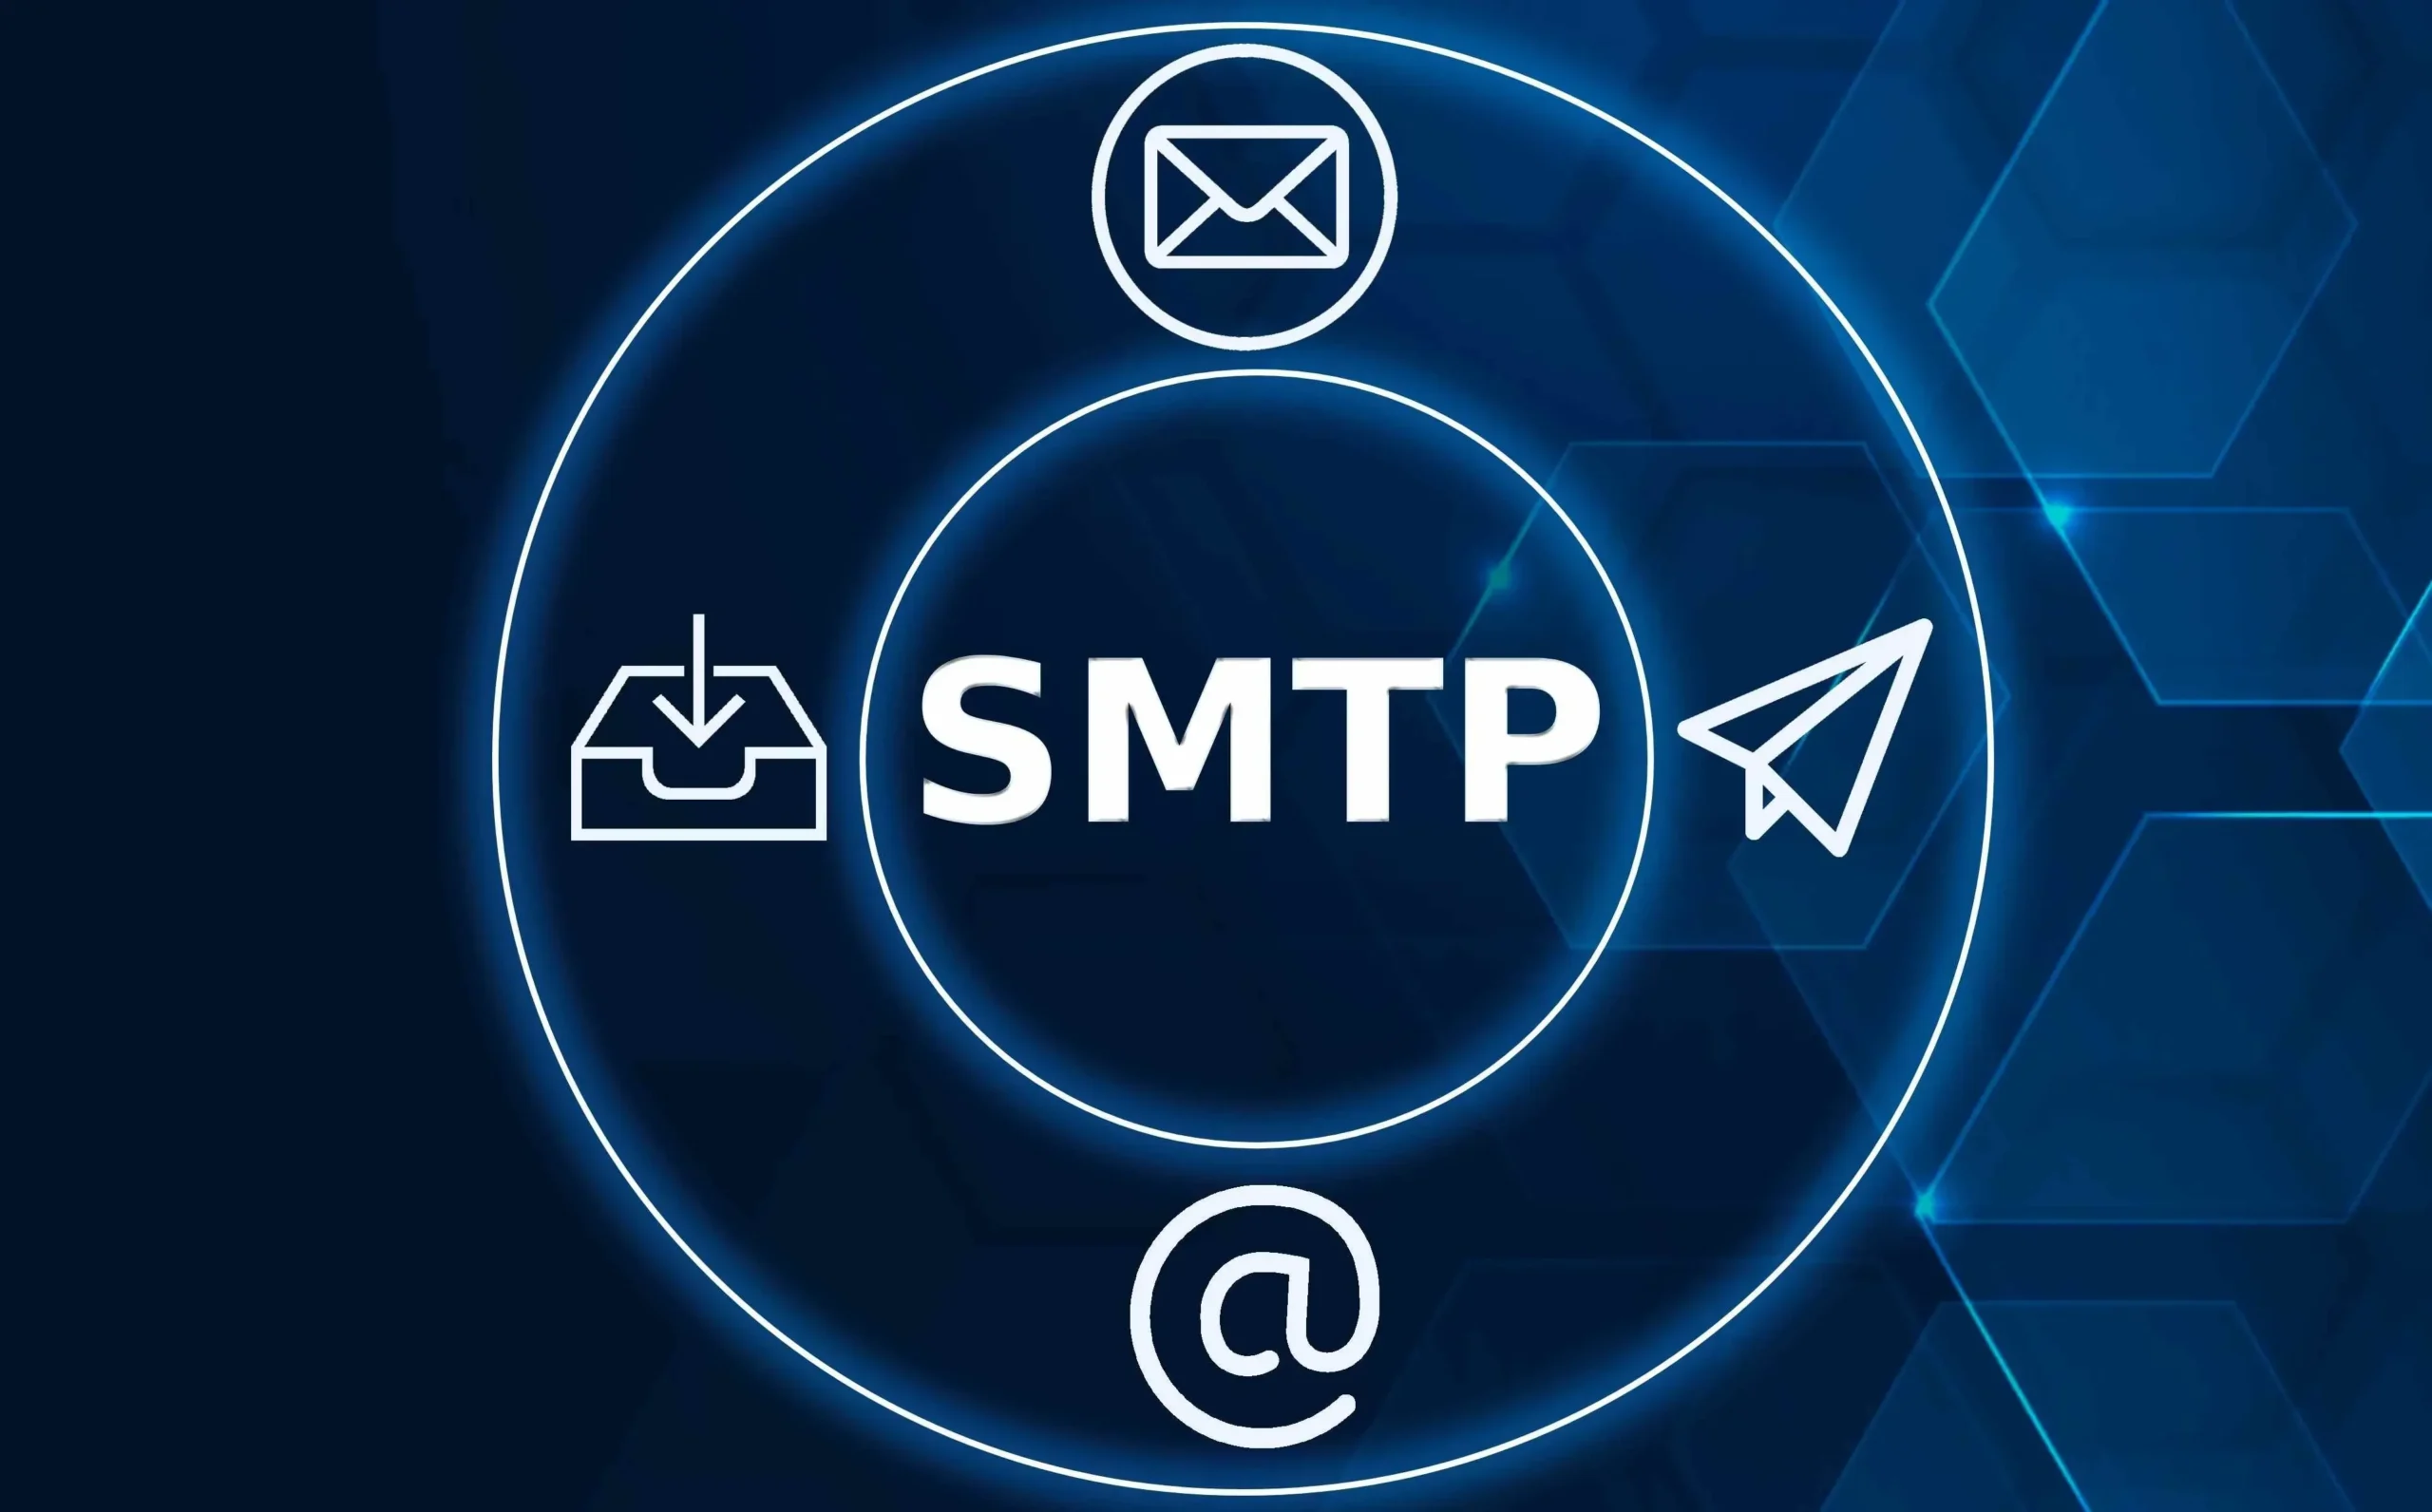 How do I enable SMTP in Gmail?